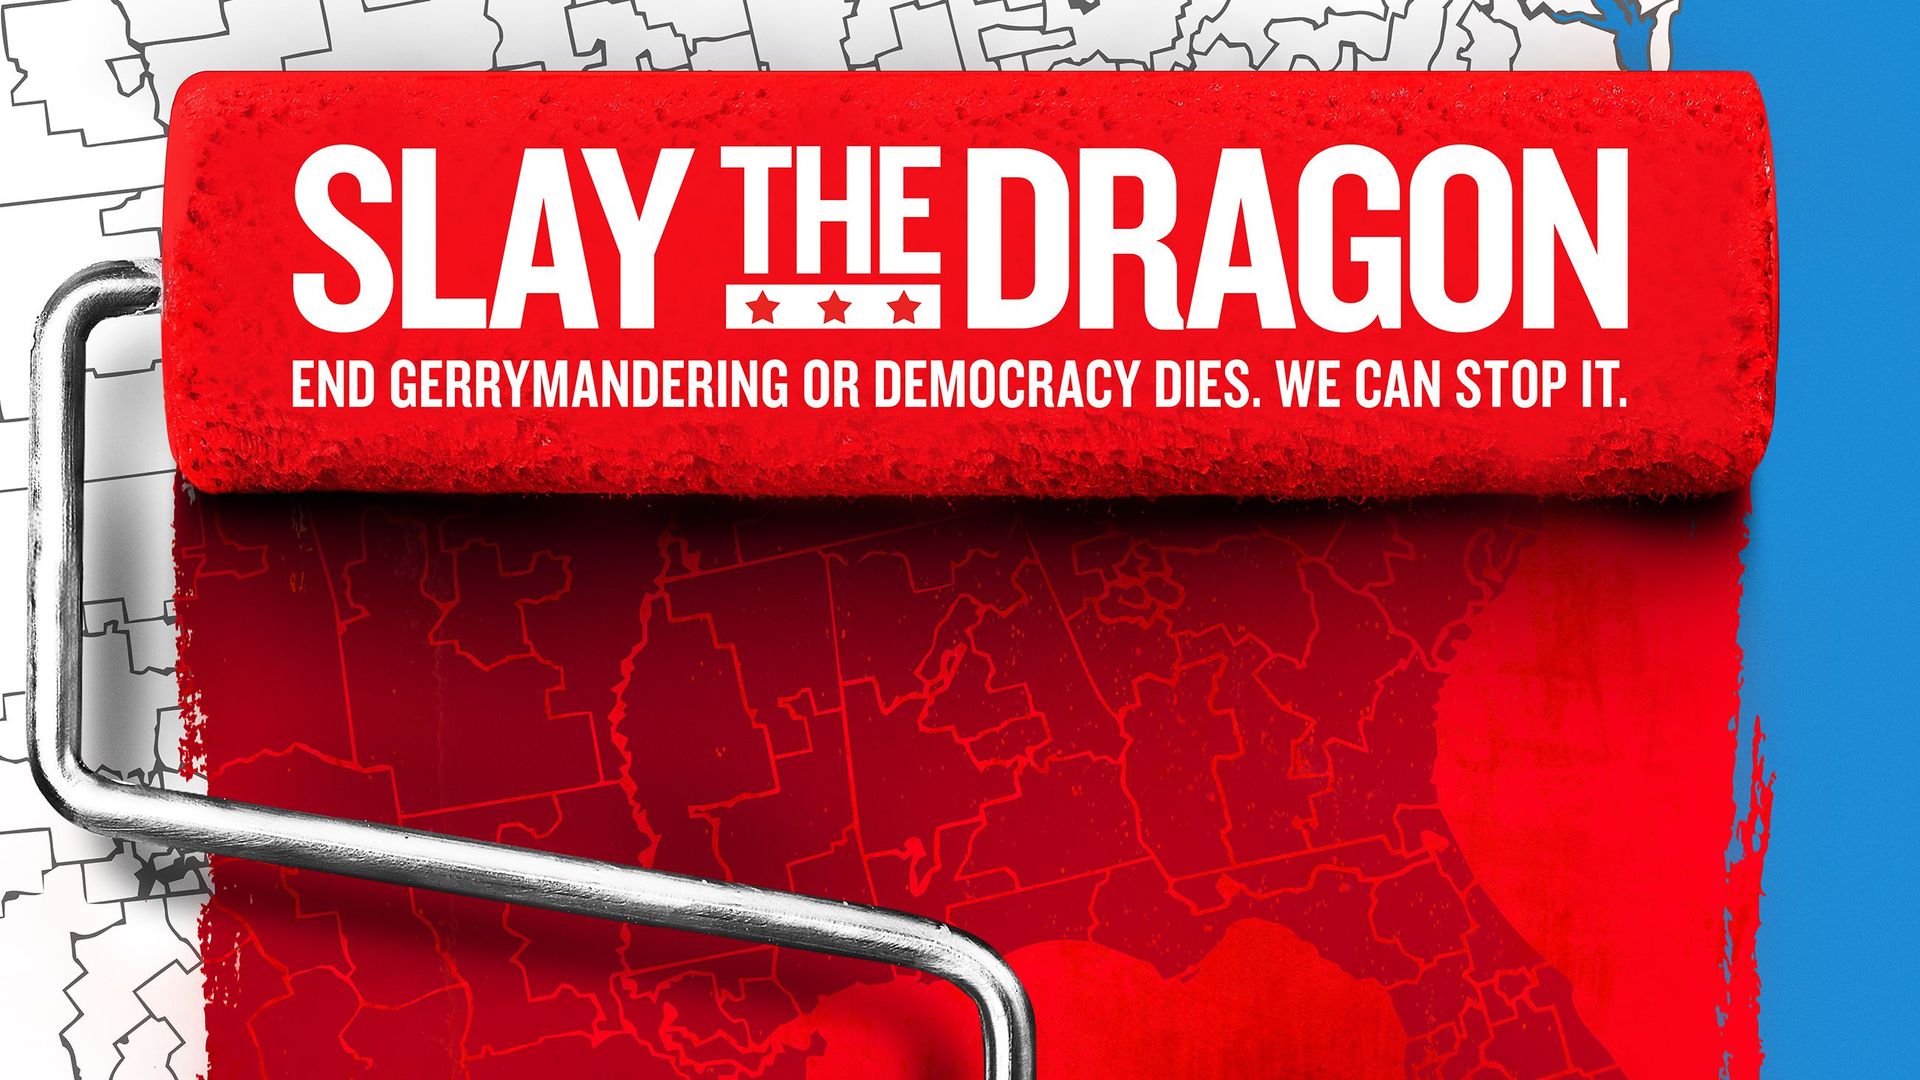 Poster for the new documentary "Slay the dragon"